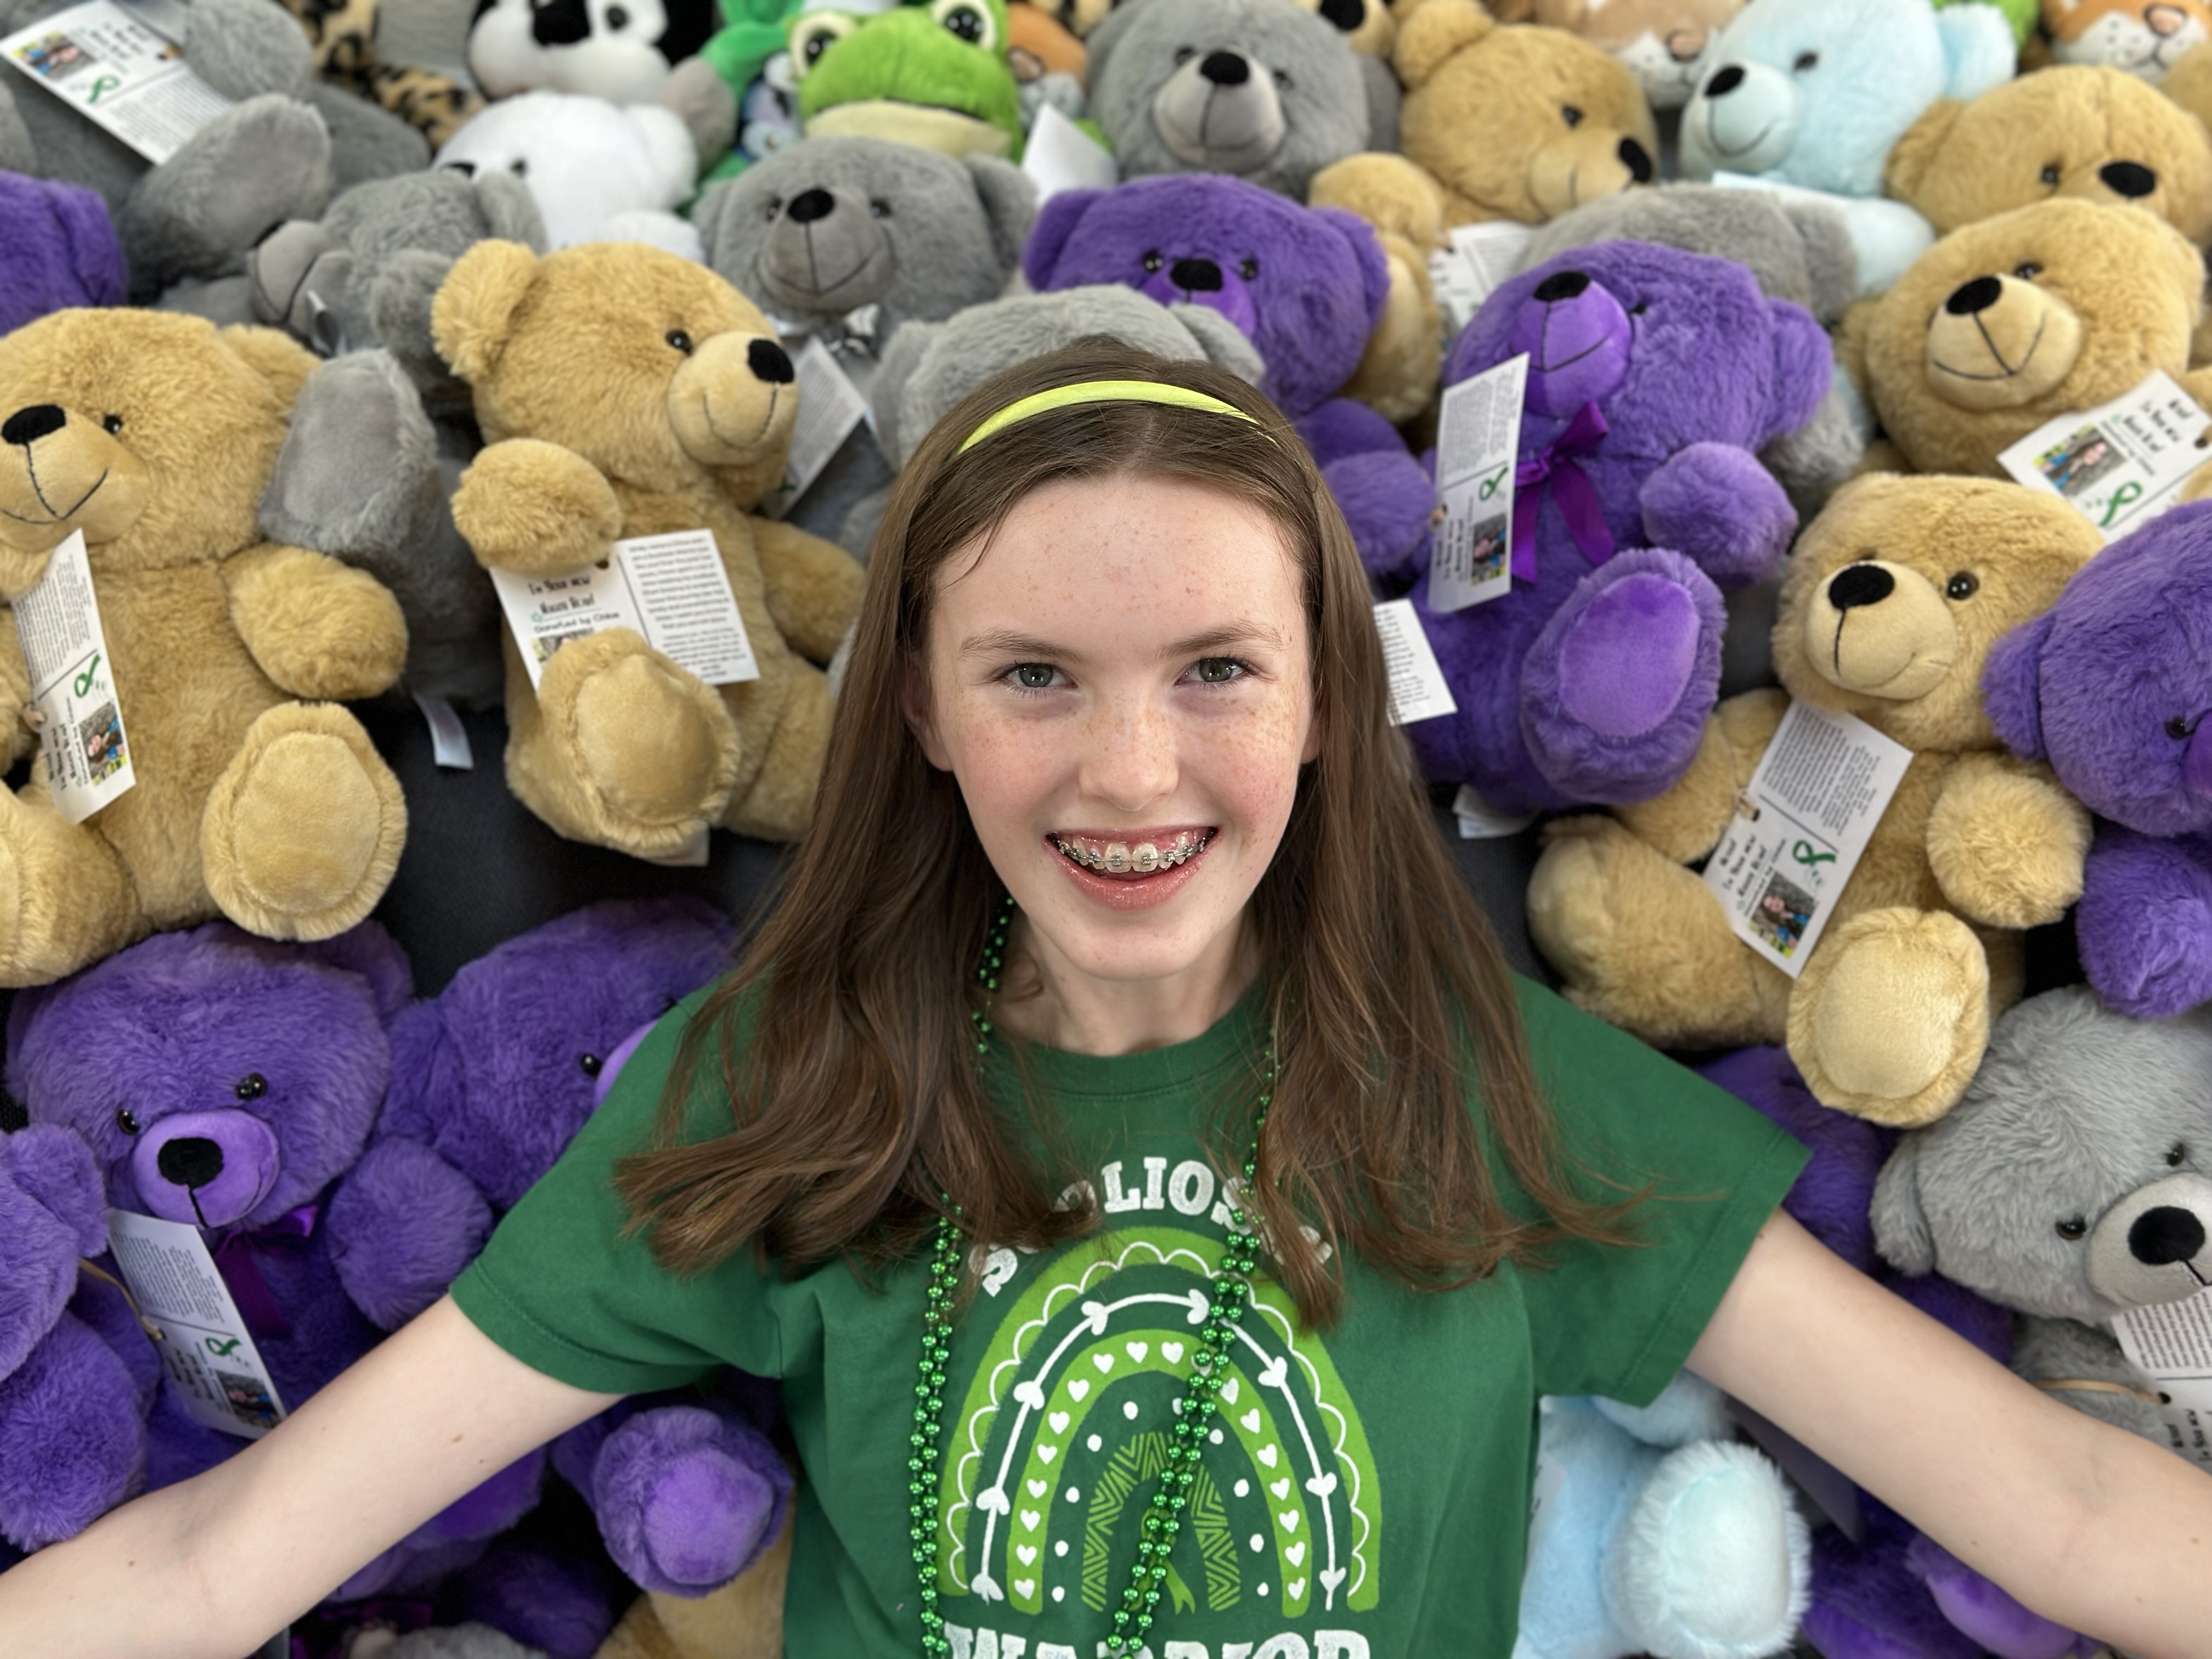 Chloe posing with the teddy bears for donation.